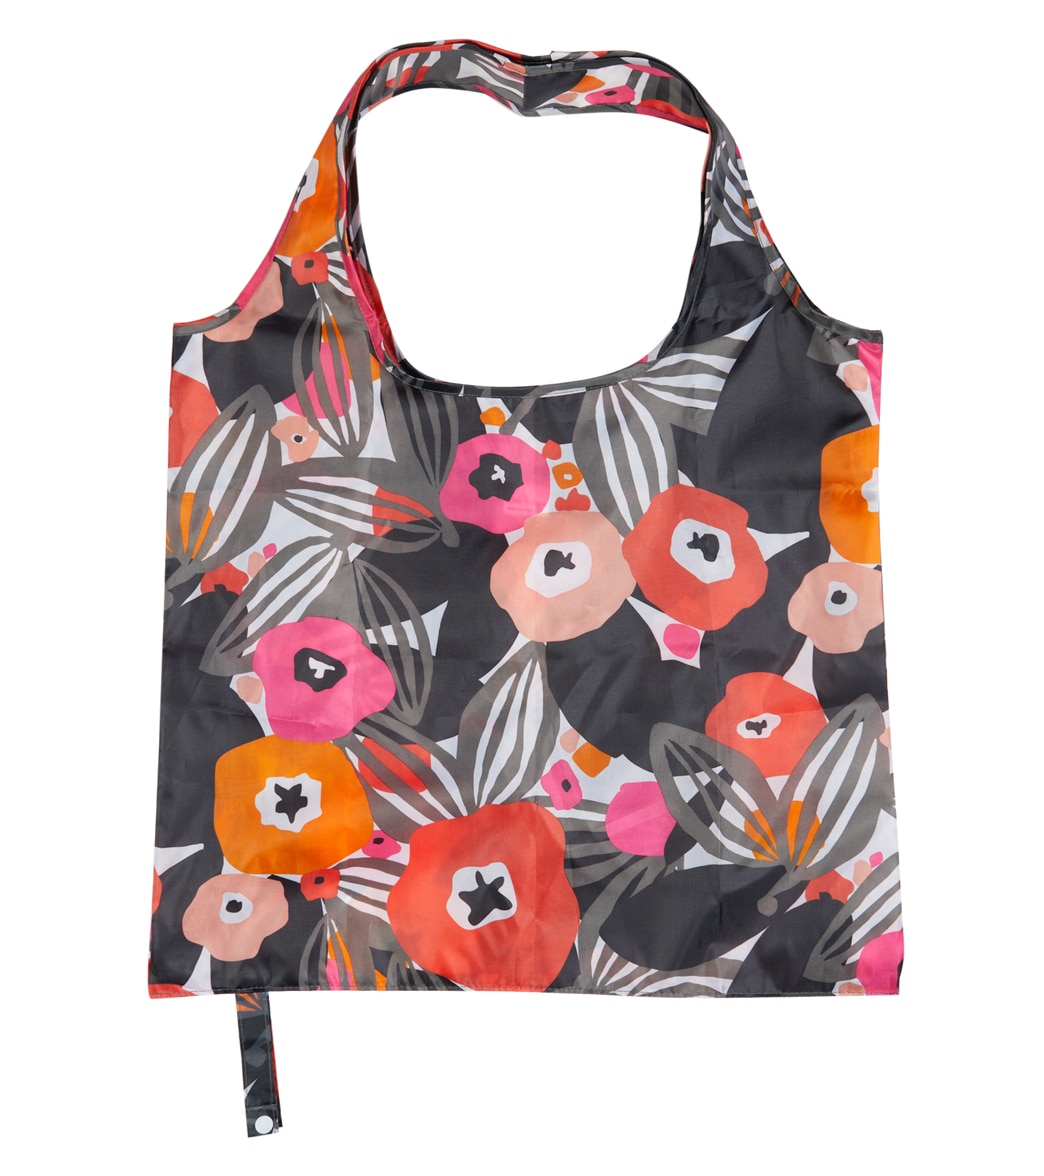 Envbags Pansies Water Resistant Tote Bag - Multi One Size Polyester - Swimoutlet.com